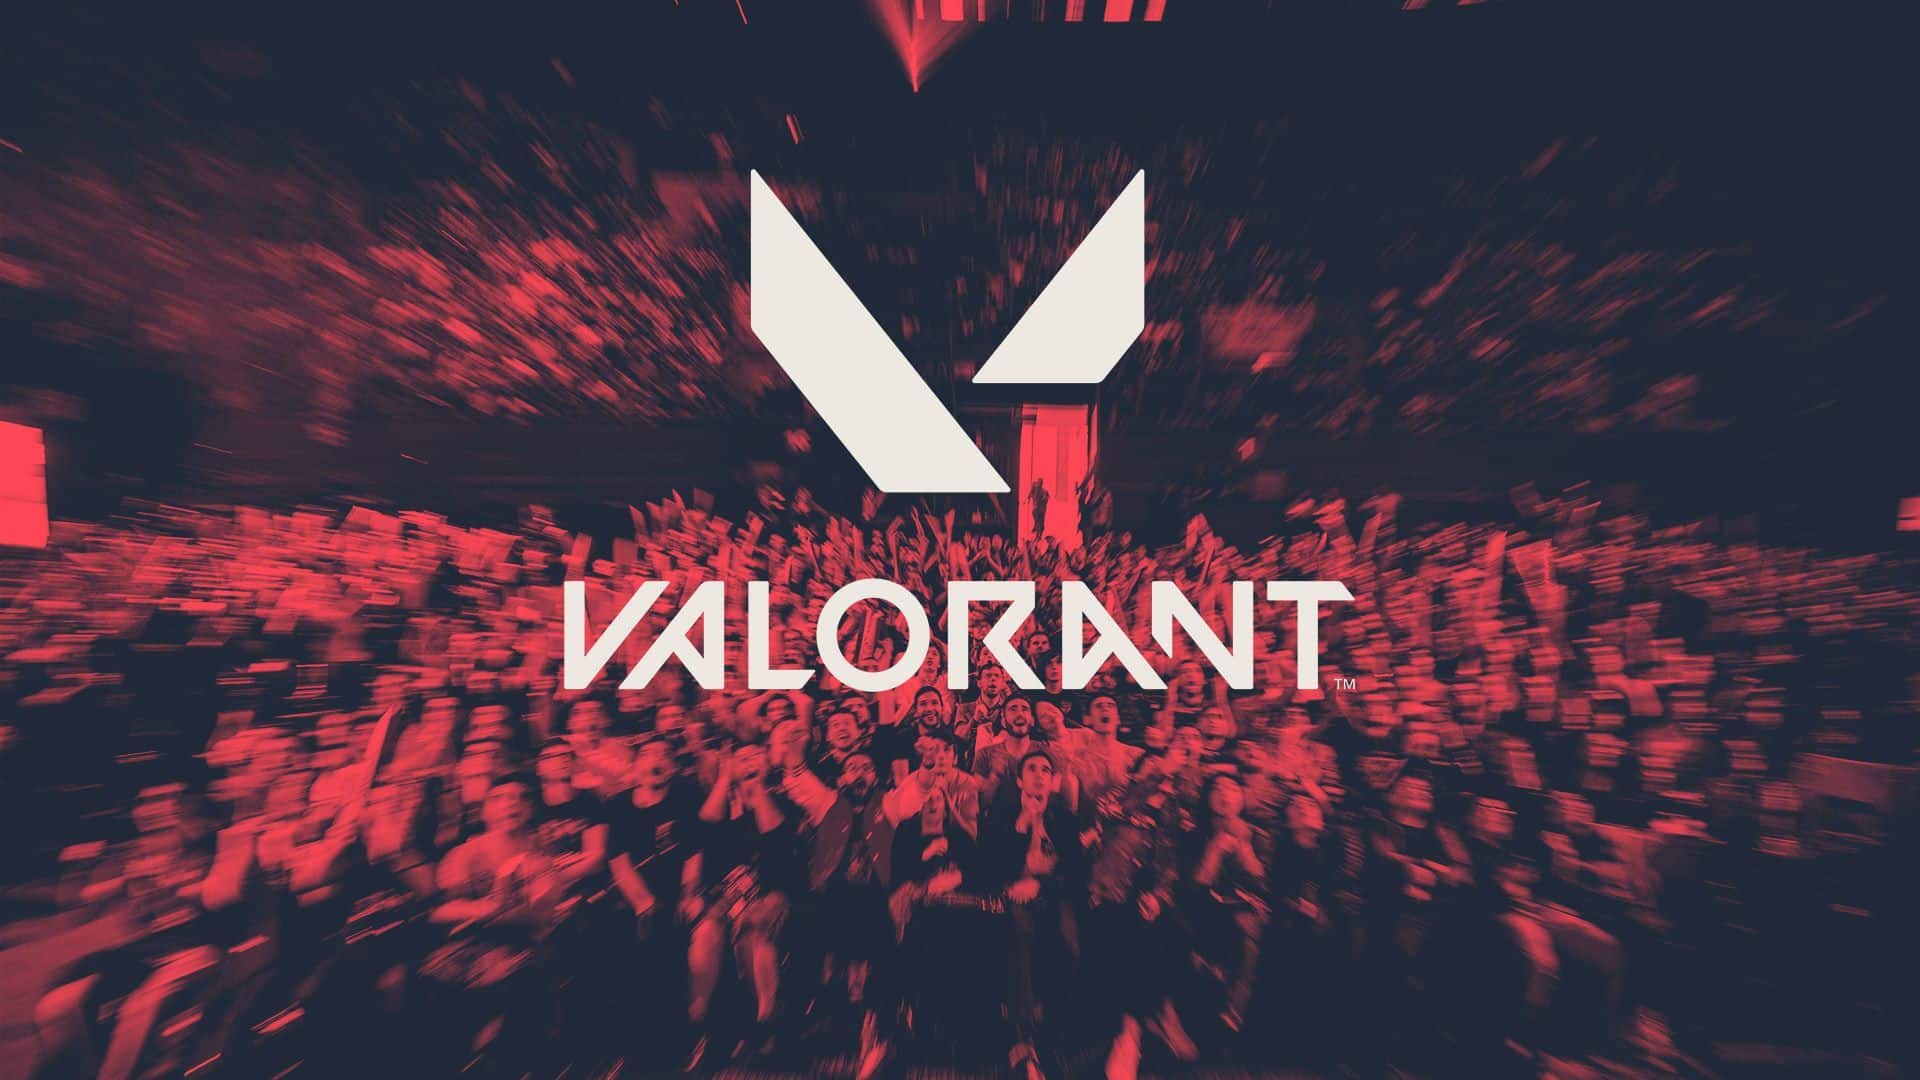 Image by riquereign – The Valorant logo over a cheering crowd.